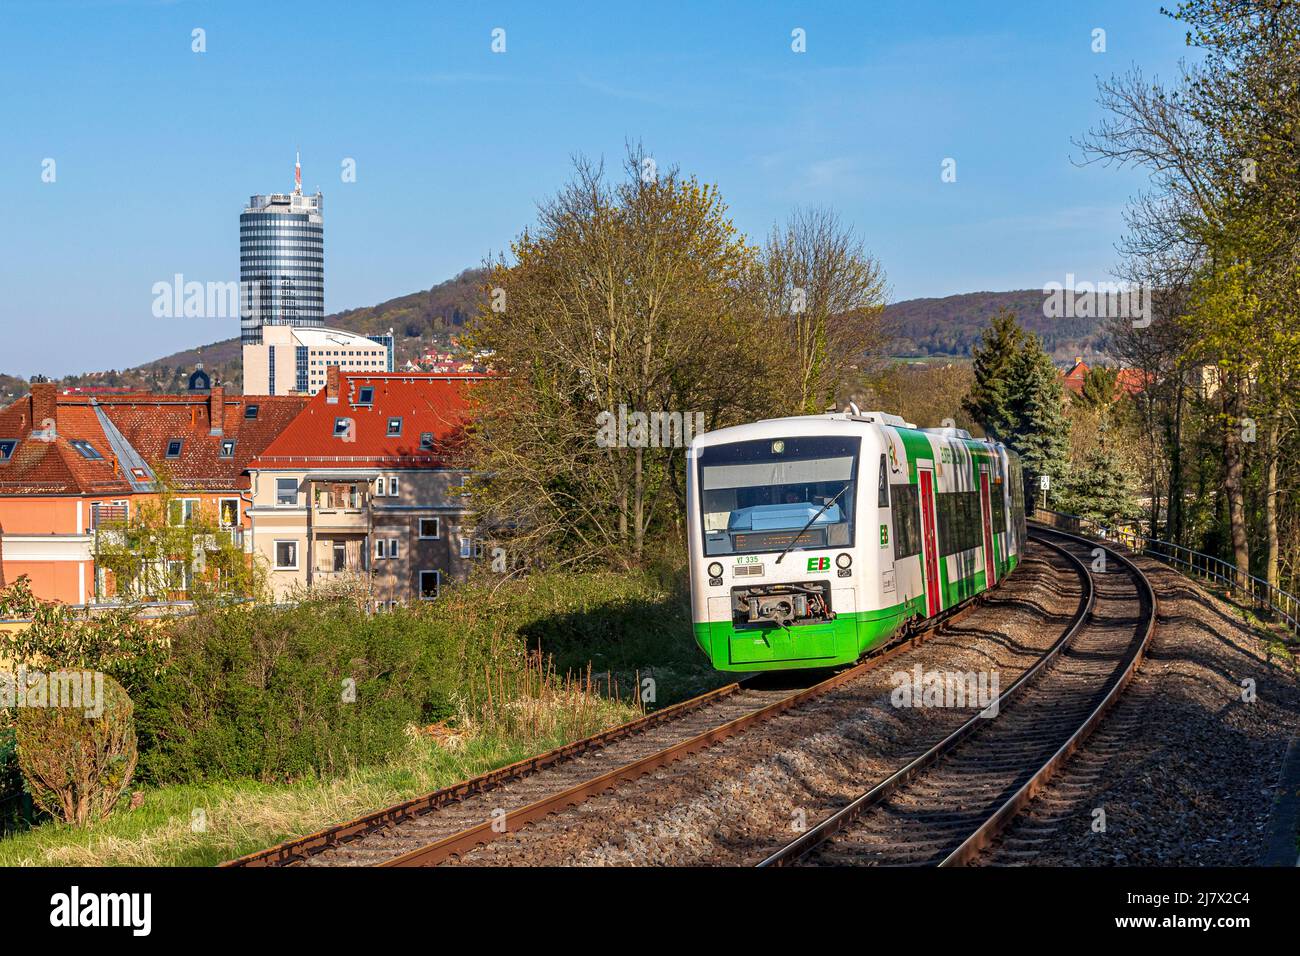 Railcars Of The Erfurter Bahn In Jena With The Jentower In The Background, Thuringia, Germany, Europe Stock Photo